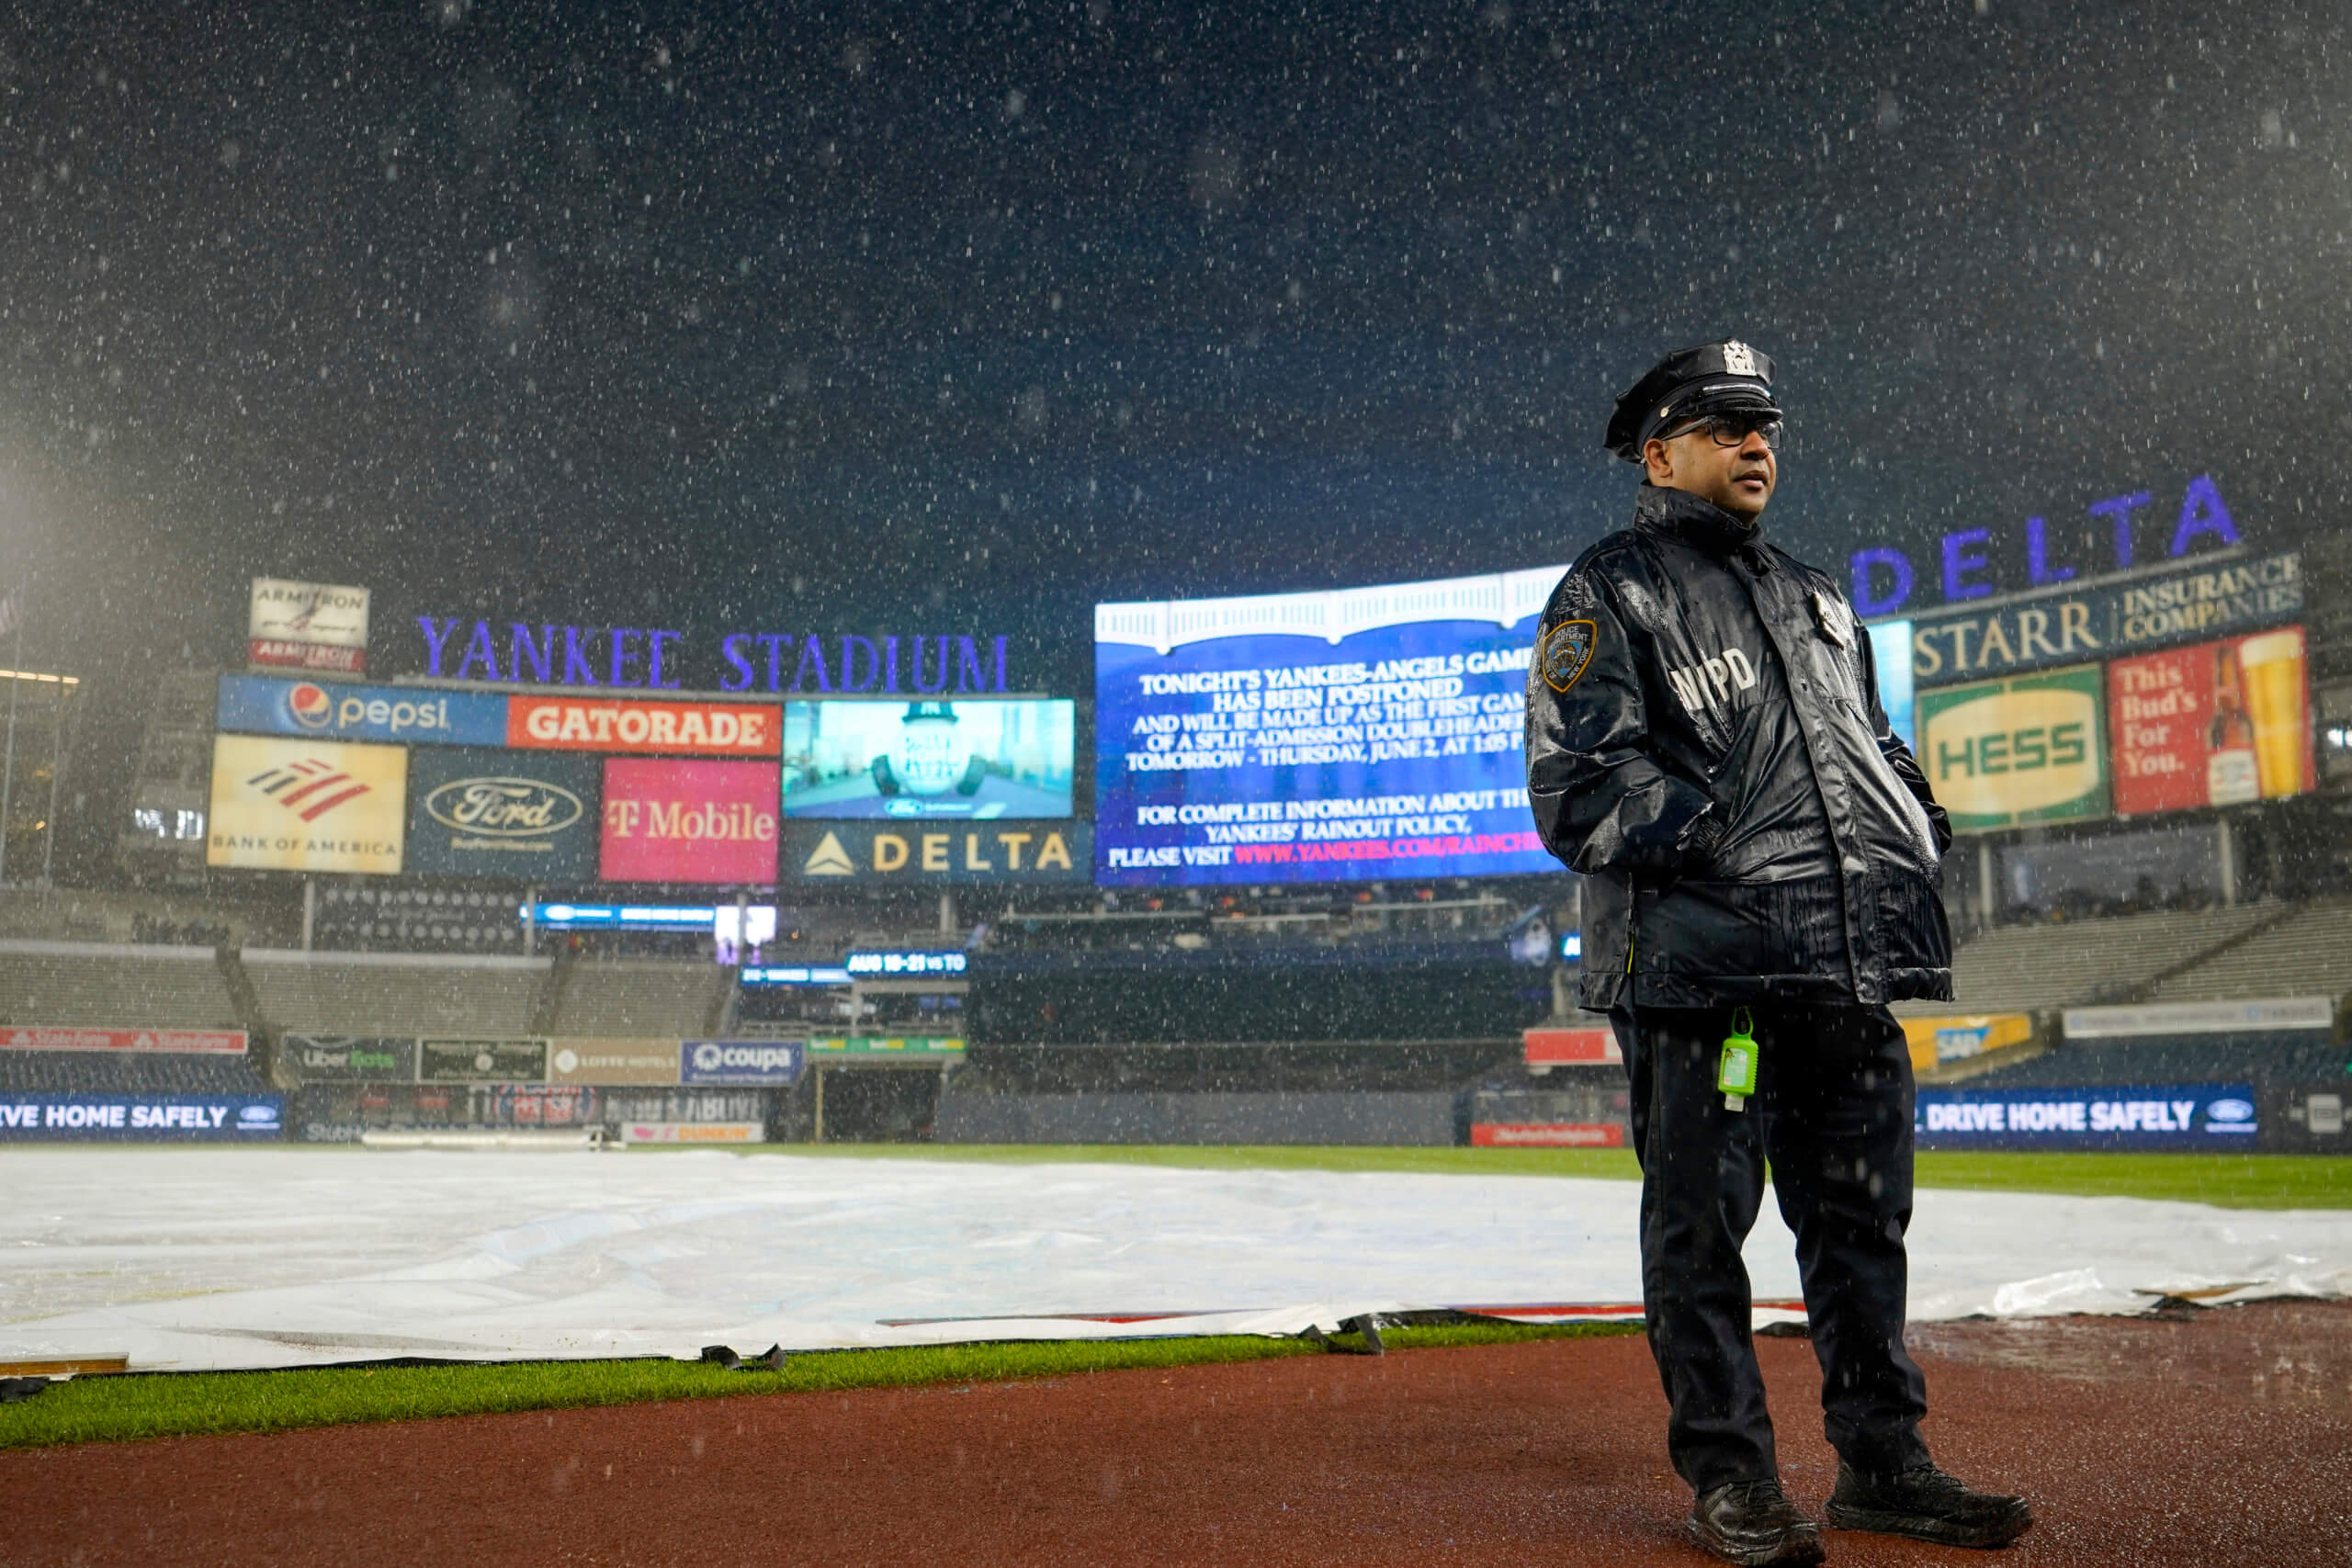 Red Sox-Yankees opener rained out; game to be made up as part of day-night  doubleheader Tuesday